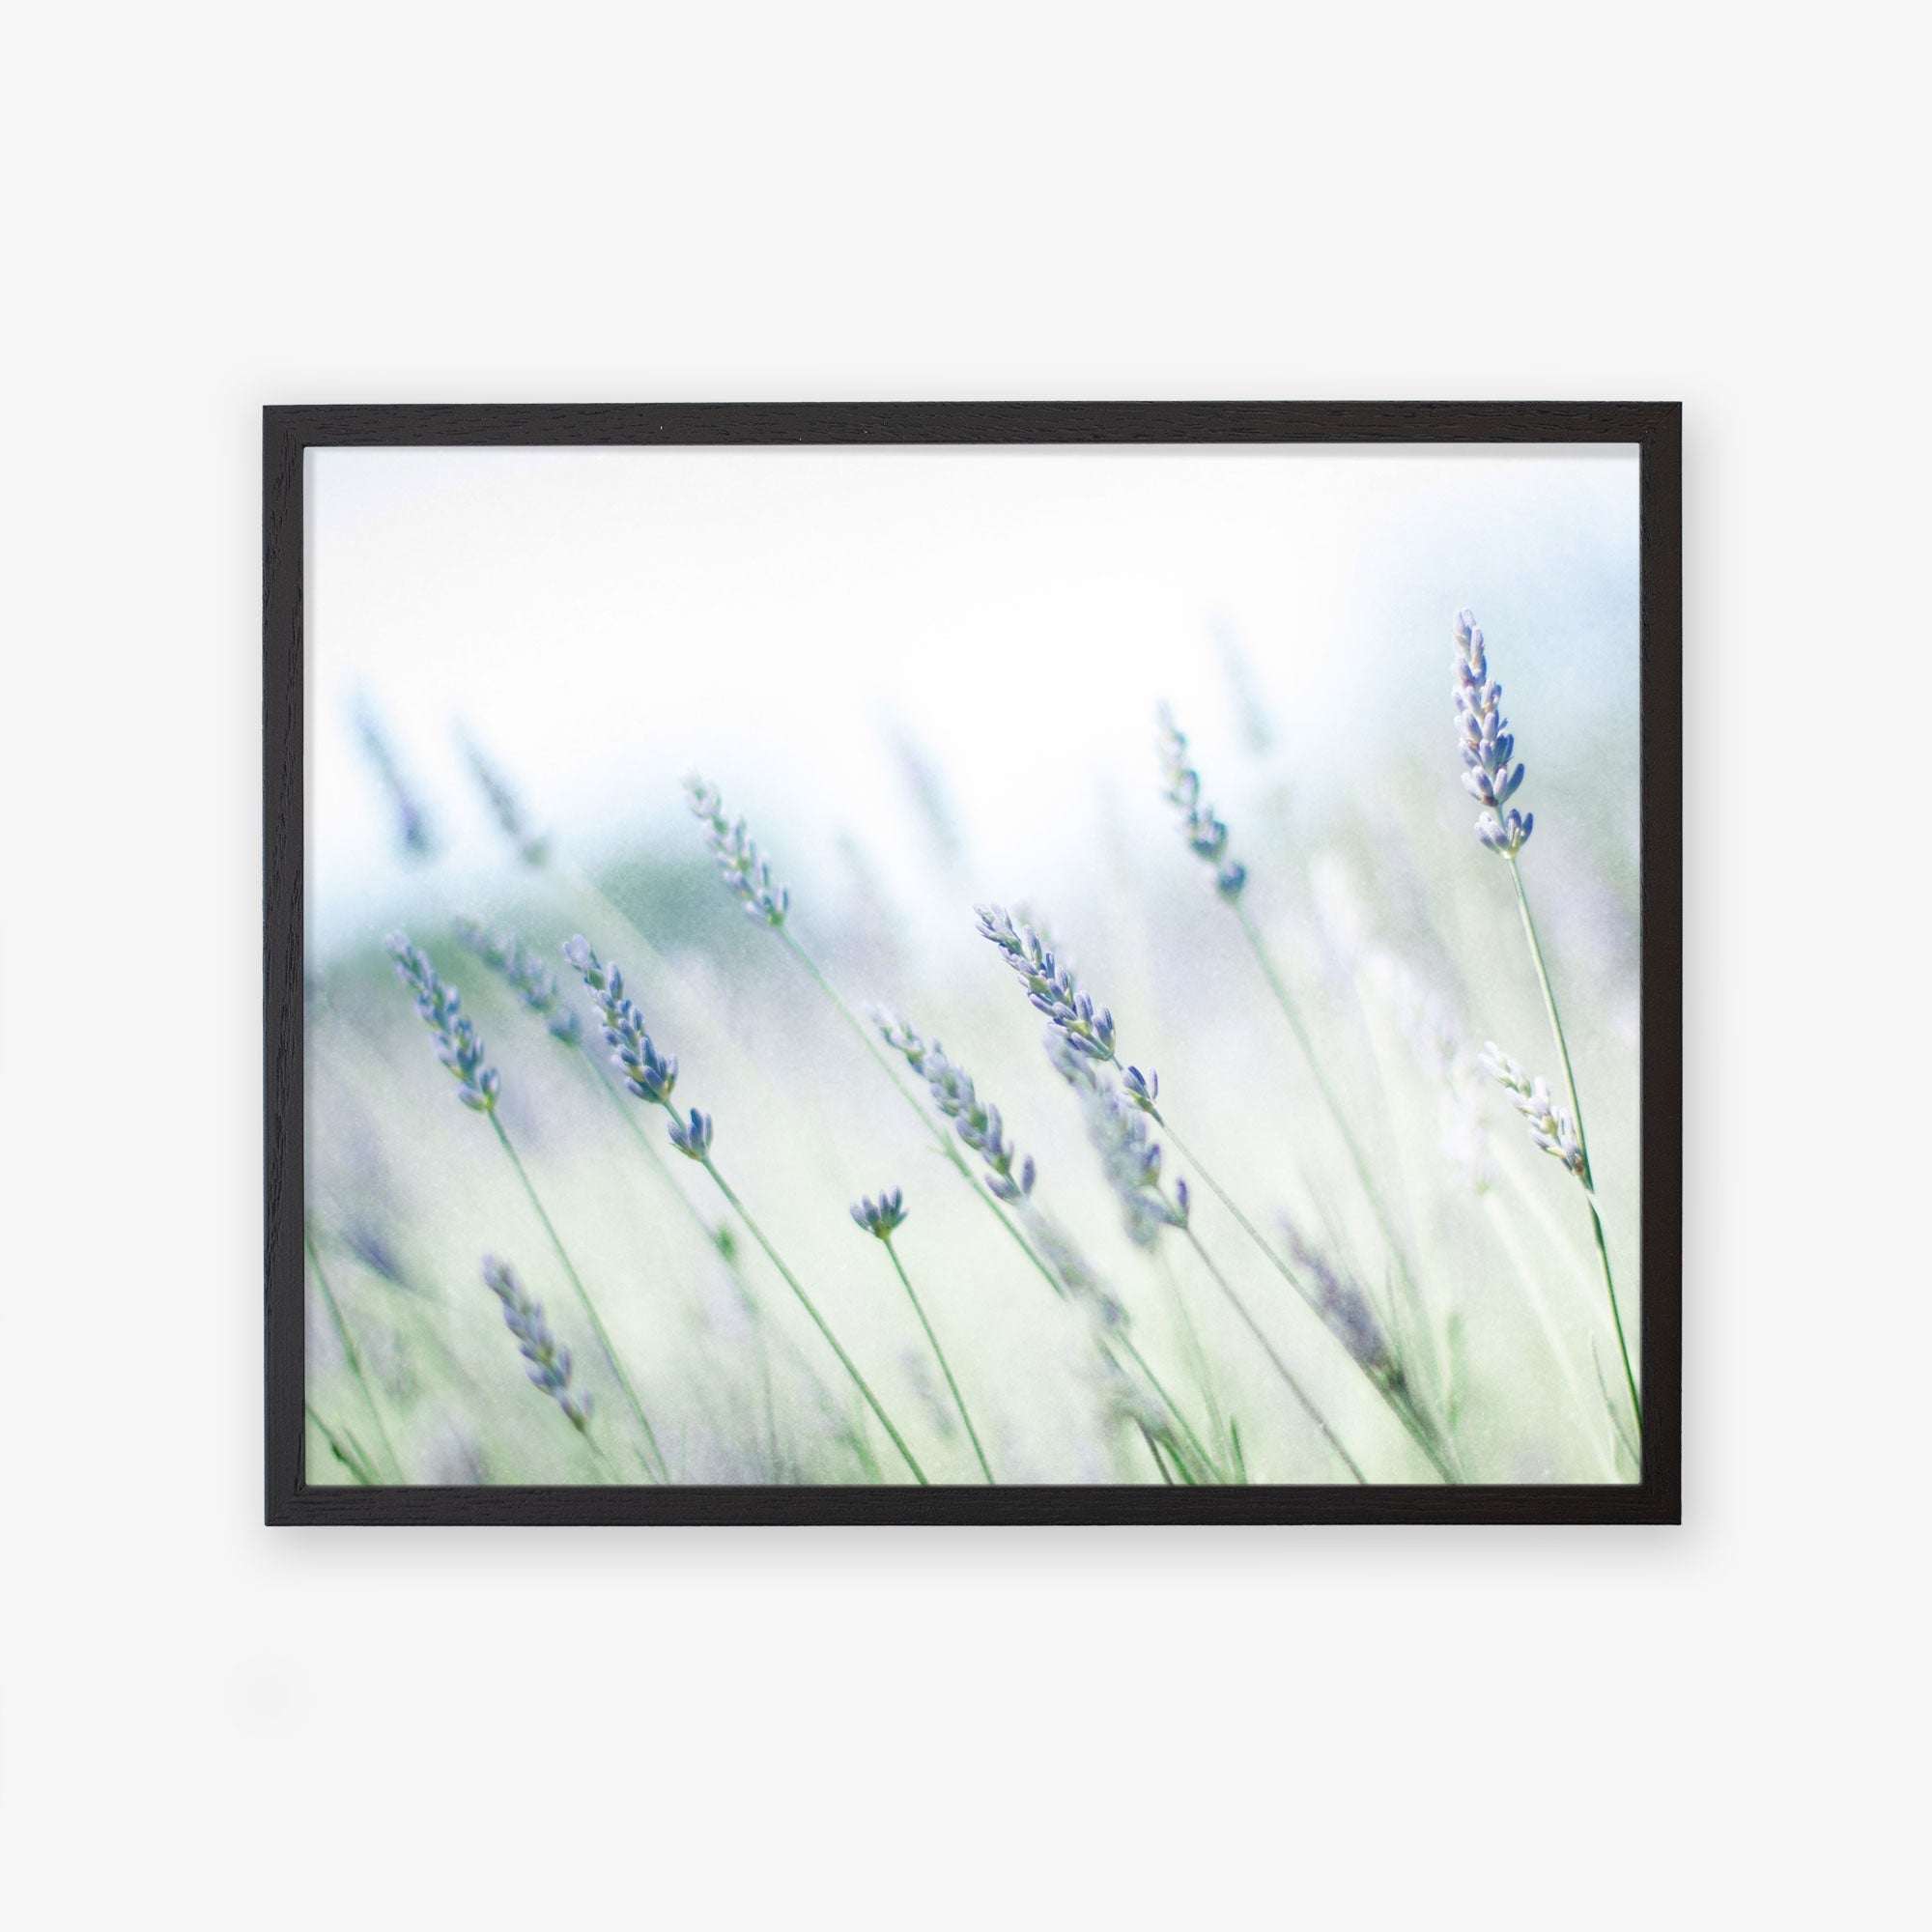 Offley Green&#39;s Rustic Farmhouse Floral Wall Art, &#39;Buds of Lavender&#39; portrays a gentle and peaceful ambiance with its softly focused lavender plants in Santa Ynez Valley and bright, ethereal background.